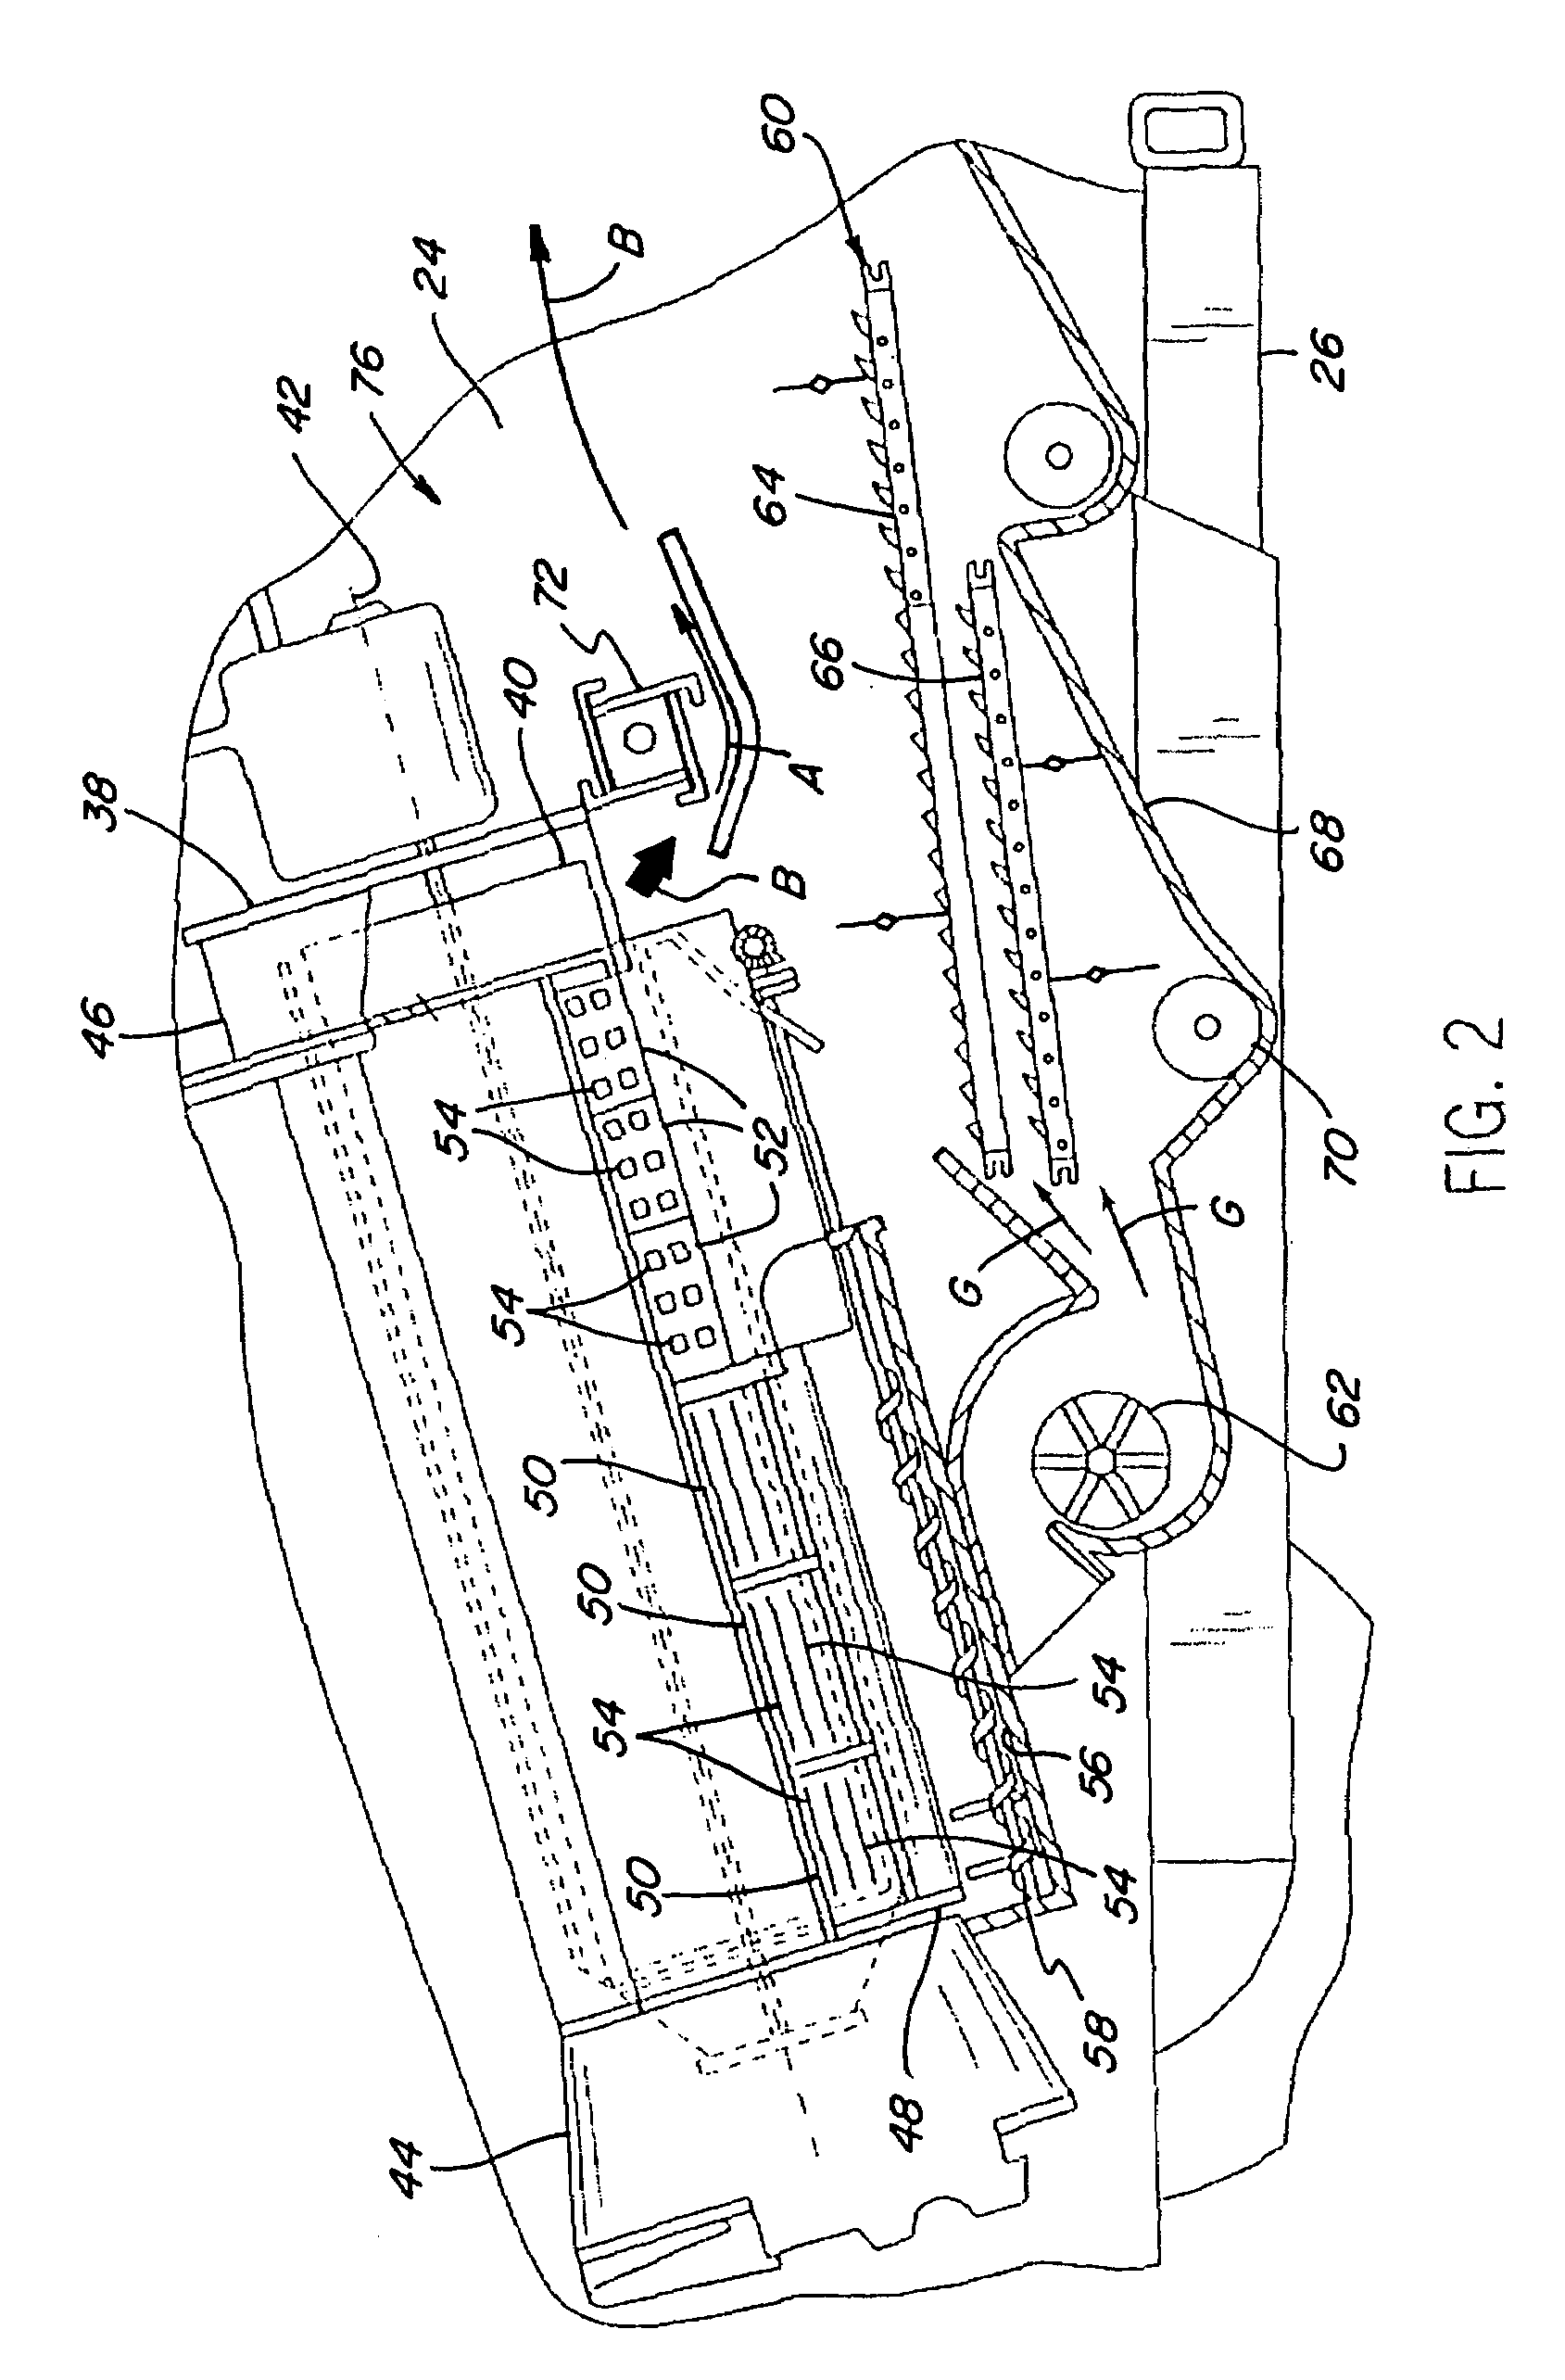 System and method for positively discharging crop residue from a combine